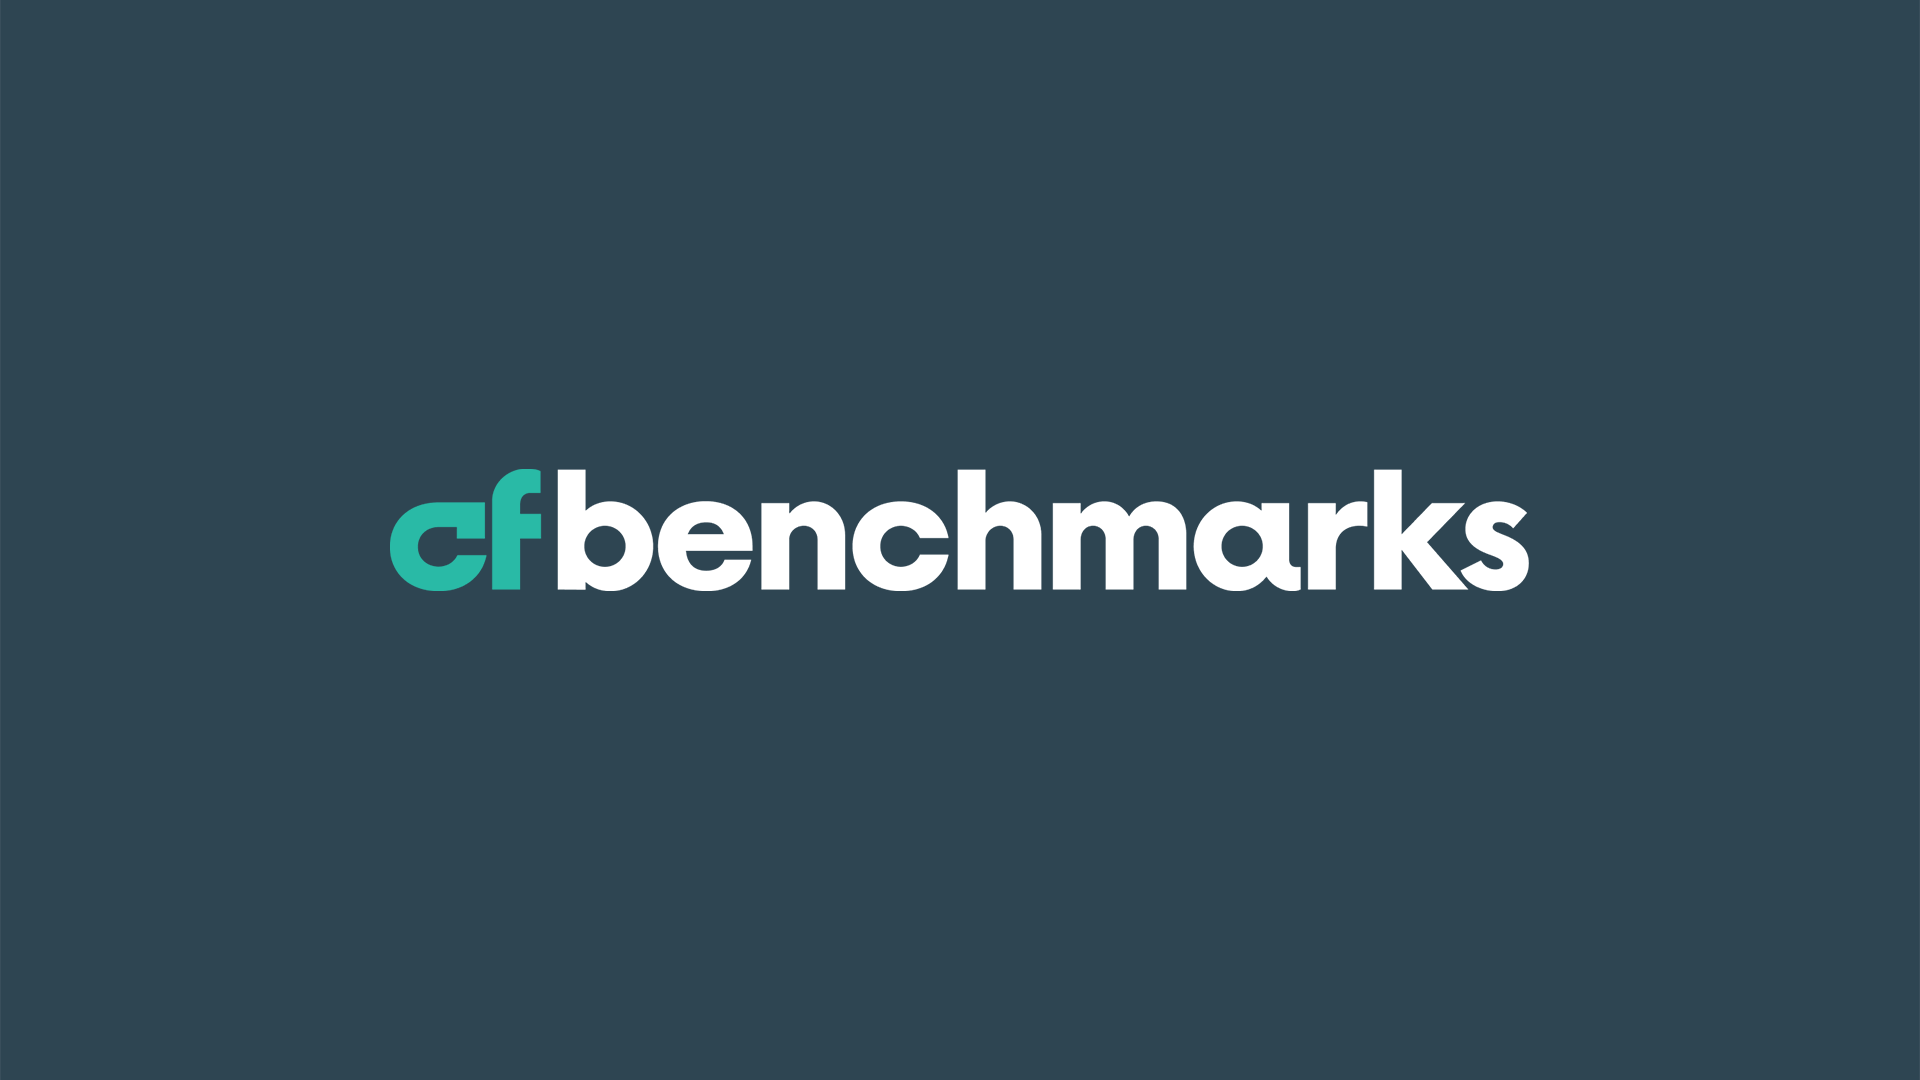 CF Benchmarks announces the addition of LMAX Digital and Gemini as Constituent Exchanges of certain CME CF Cryptocurrency Family indices